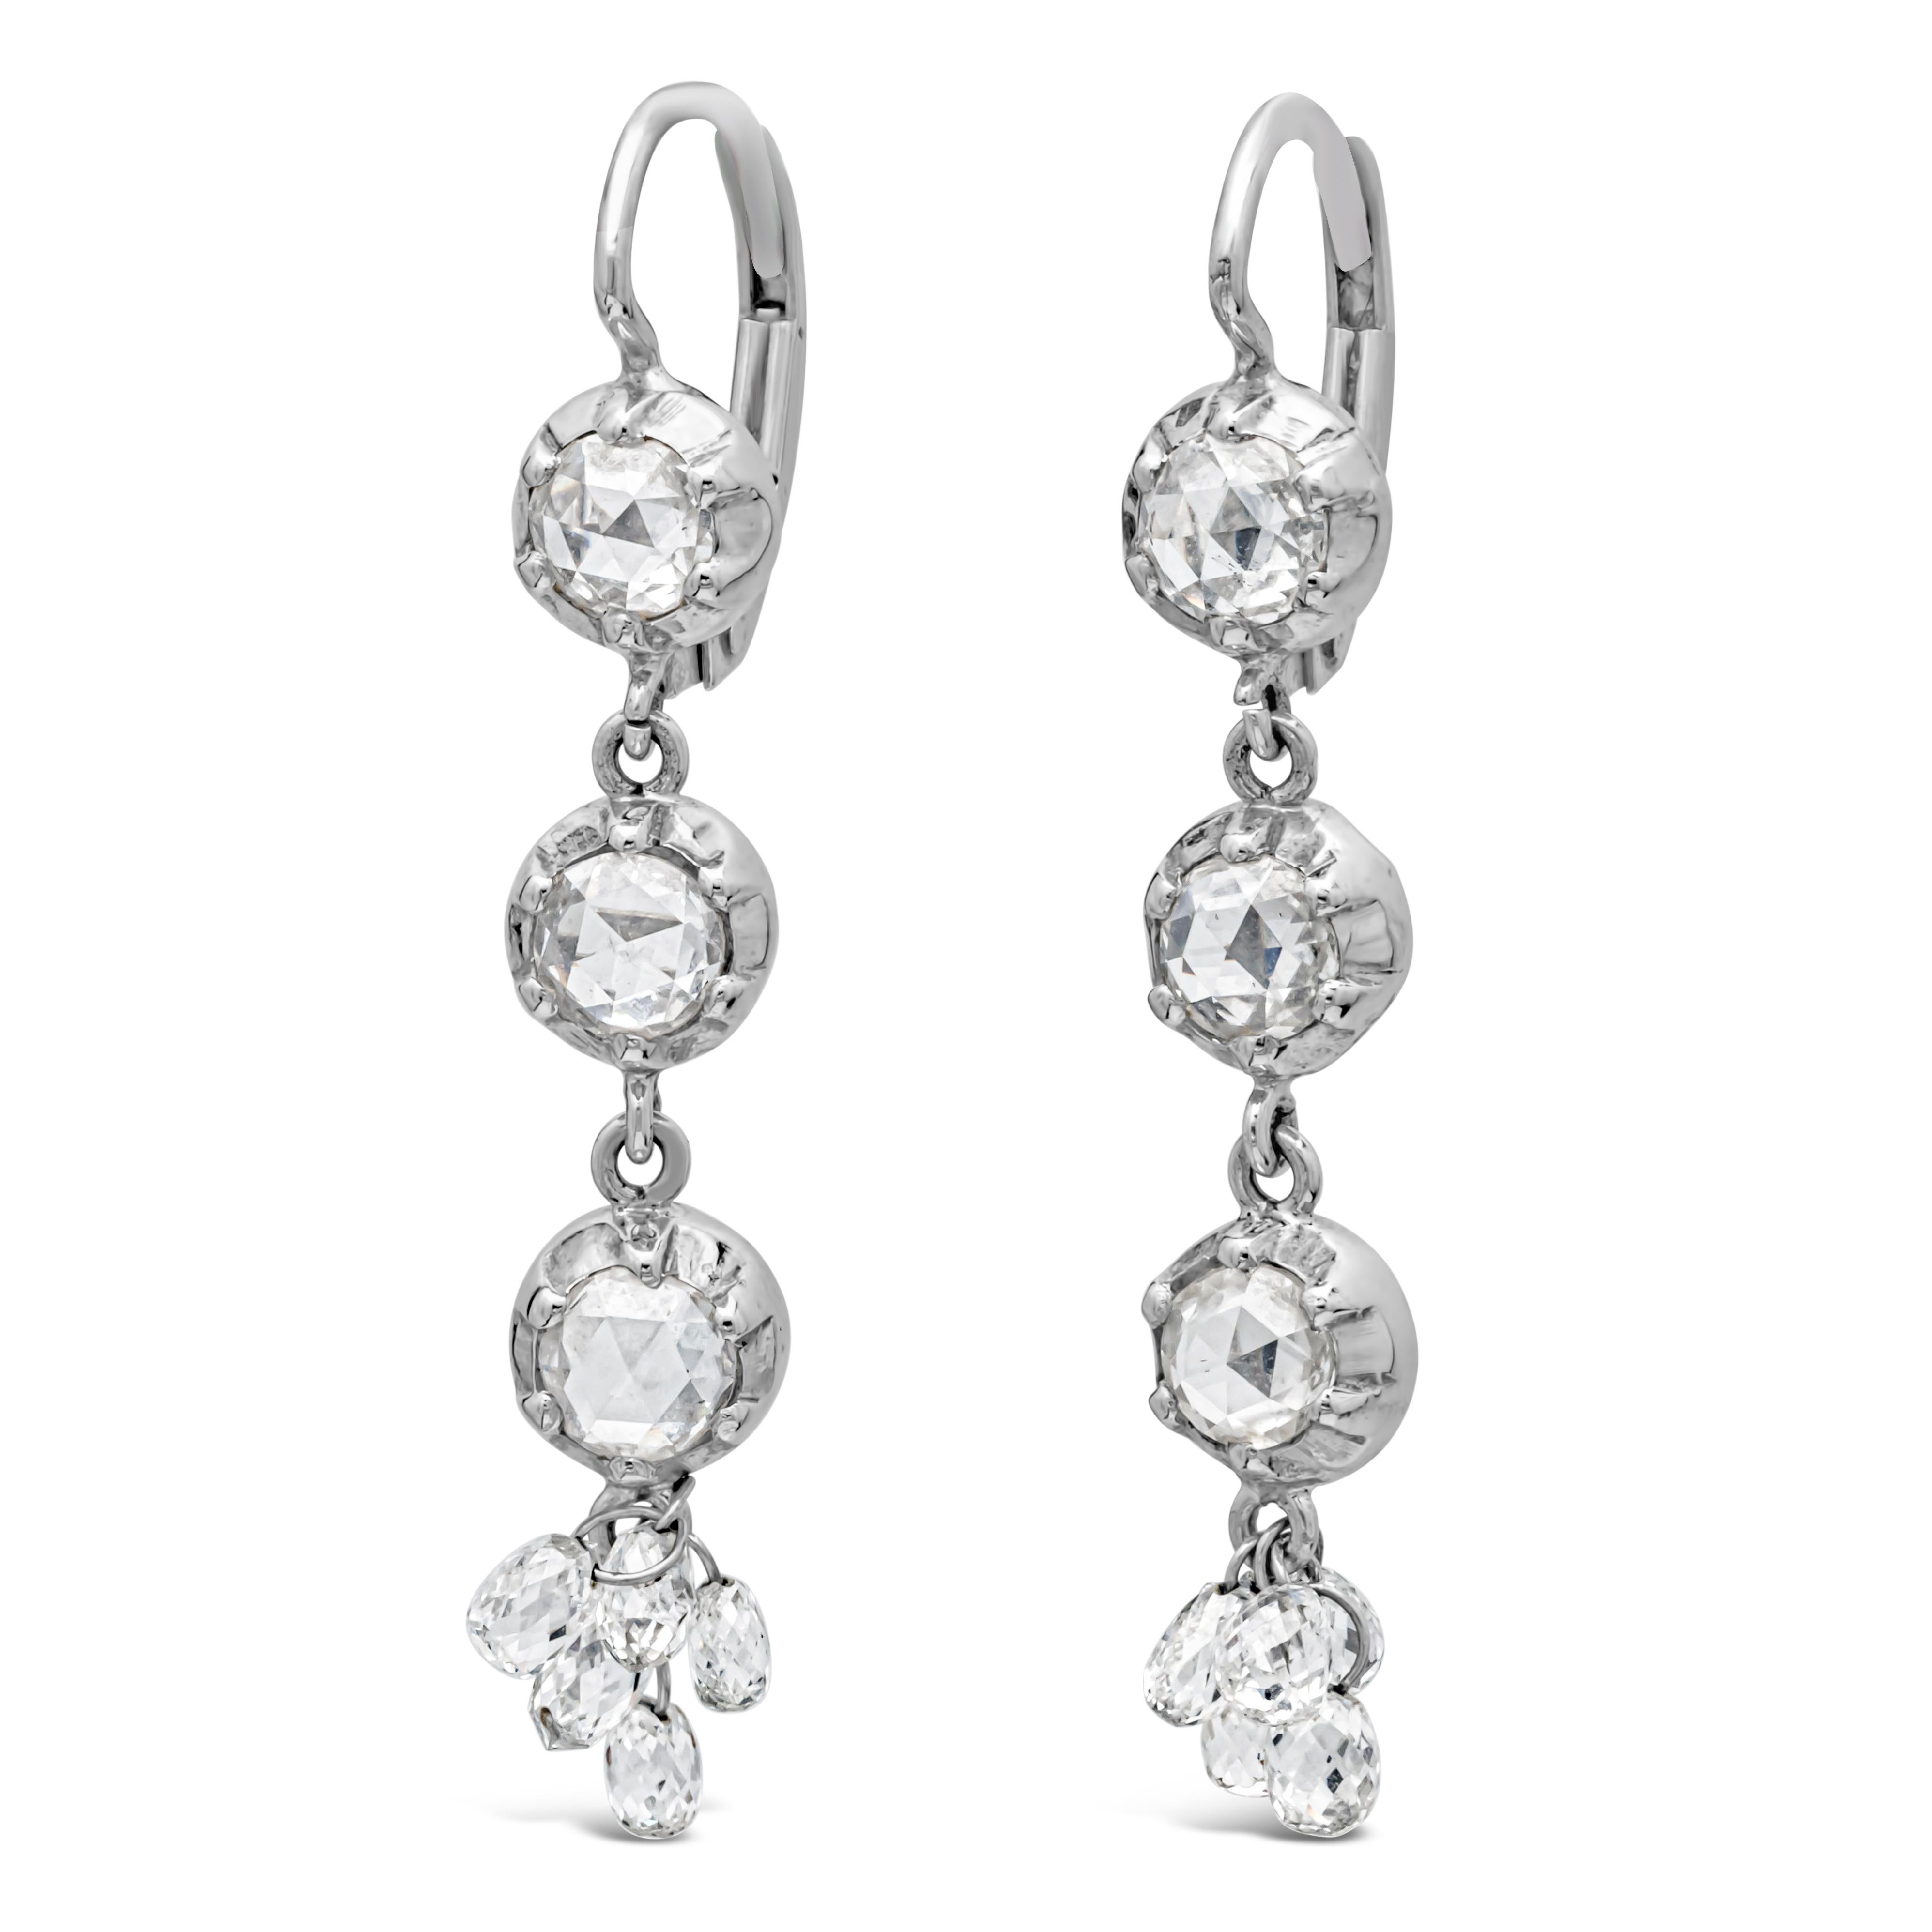 Showcasing a simple and classy 18k white gold drop earrings set with 6 brilliant round cut diamonds, accented by 10 dangling small briolette cut diamonds weighing 2.00 carats total, F color and VS in clarity. Hanging from a diamond encrusted 14k